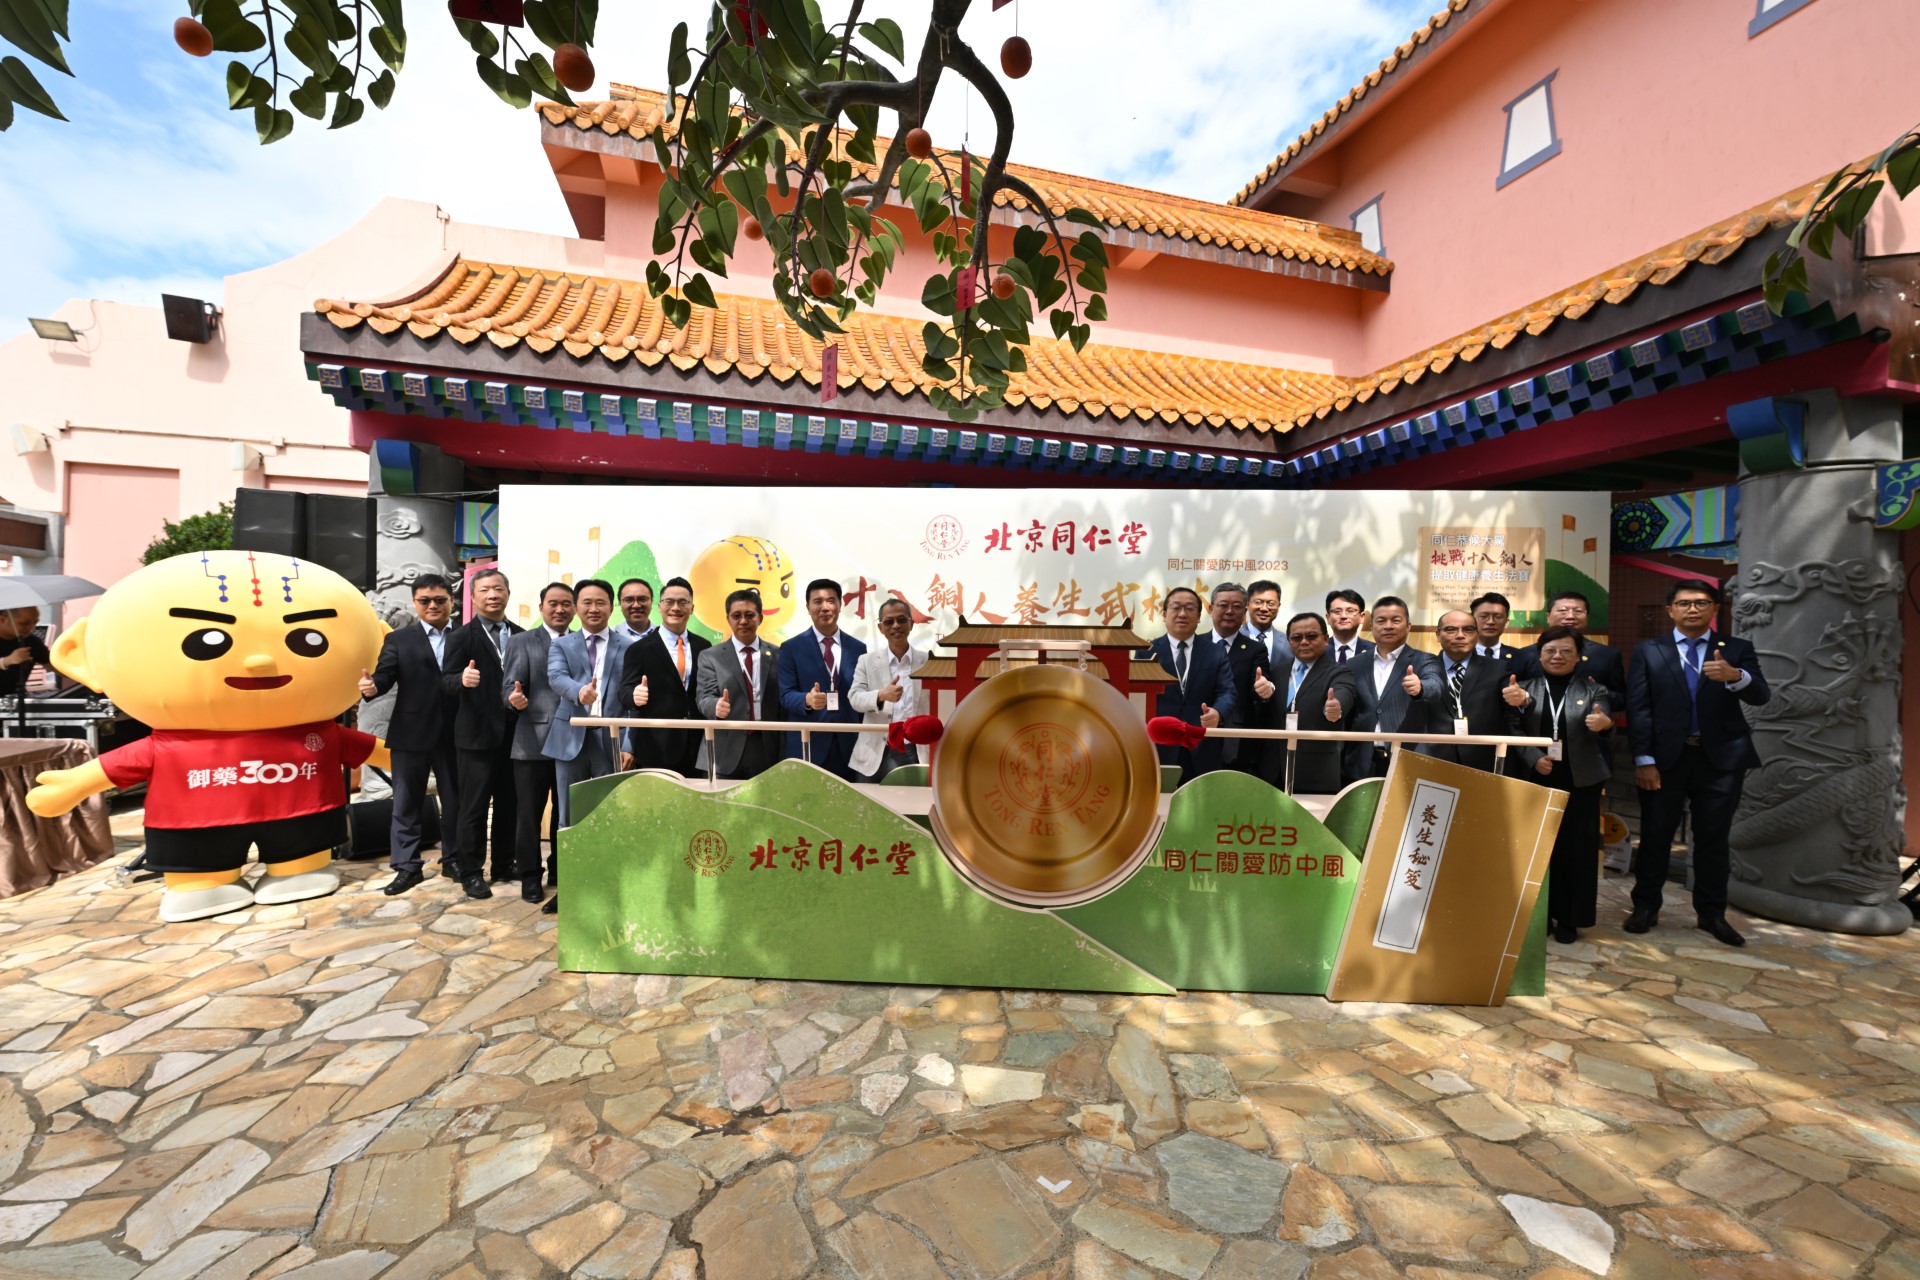 Image 1: Officiating guests unveil the opening of the first Traditional Chinese Medicine Regimen and Culture Exhibition outside of the Tong Ren Tang Base focused on the theme of stroke prevention. At the sound the gong, the event is officially underway.